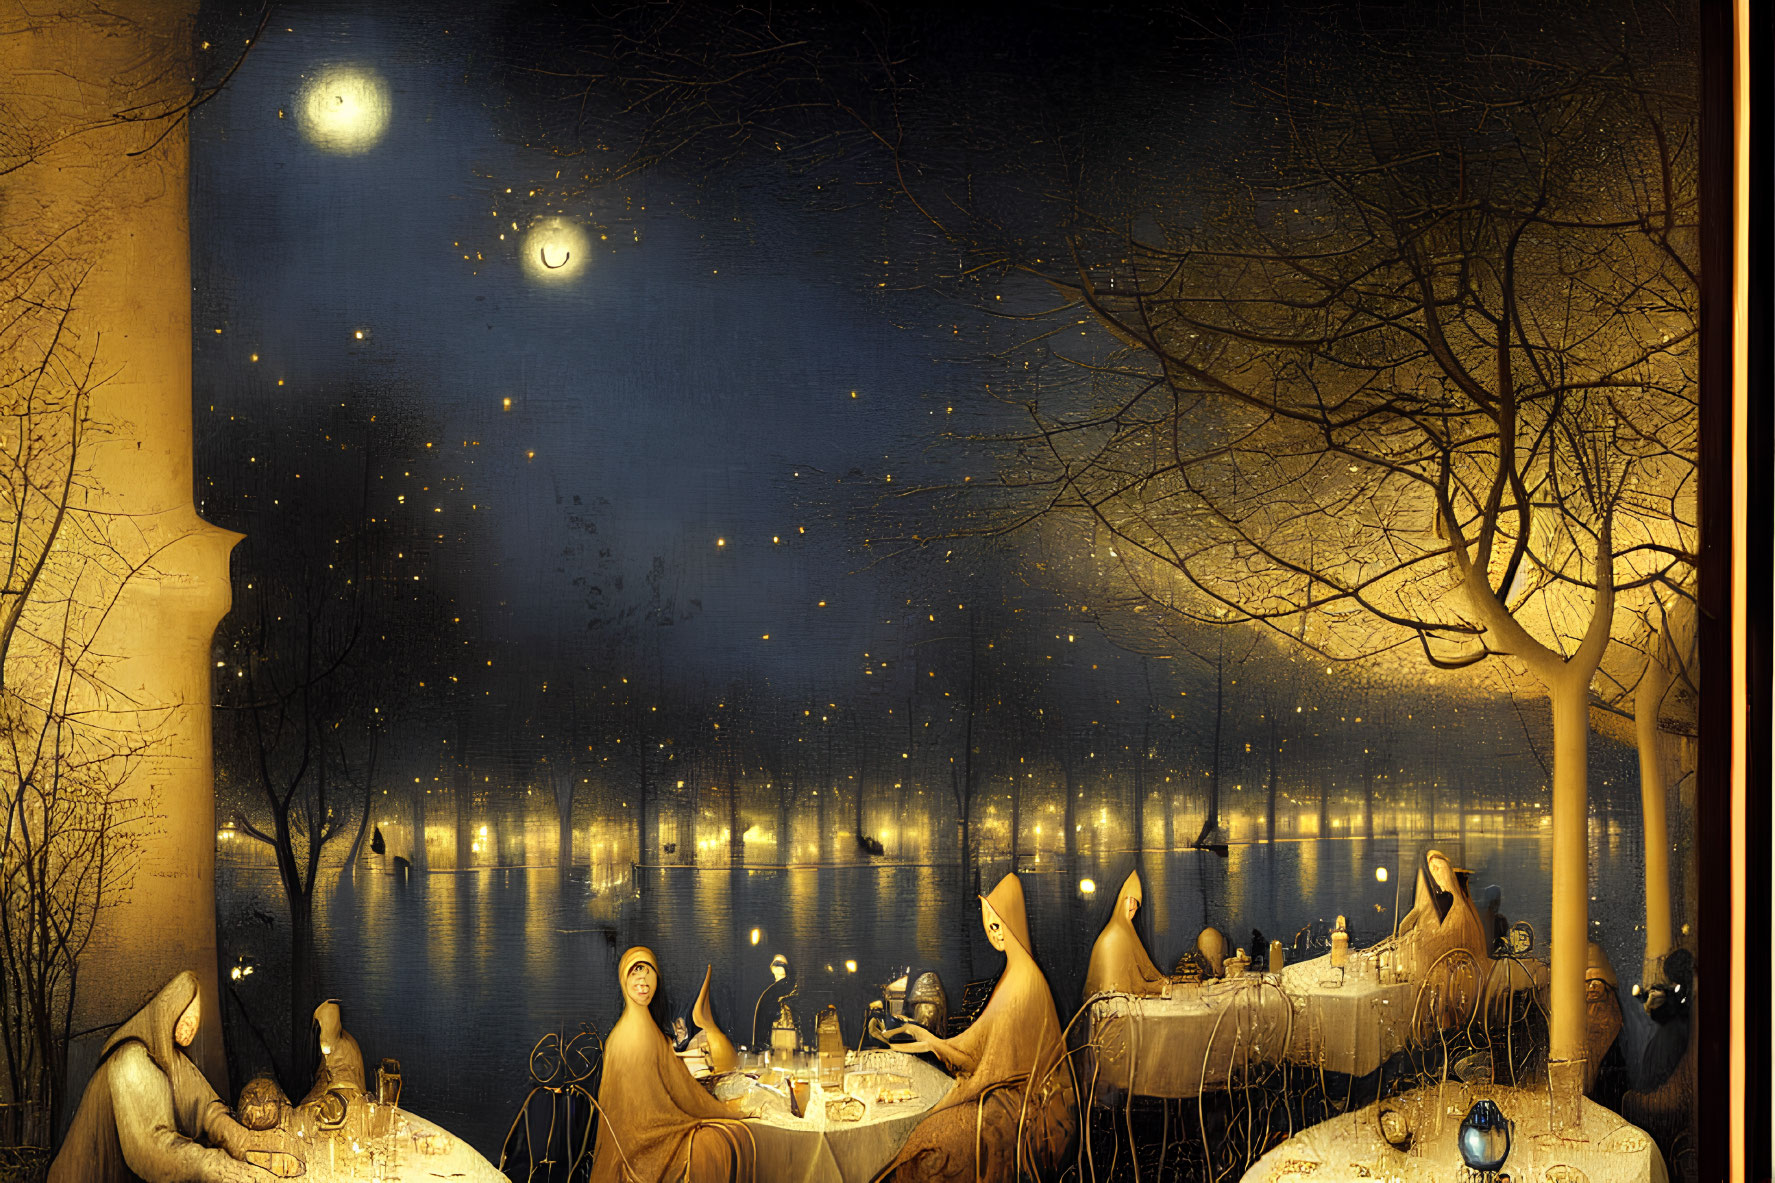 Surreal Nocturnal Lakeside Banquet Artwork with Moonlit Sky